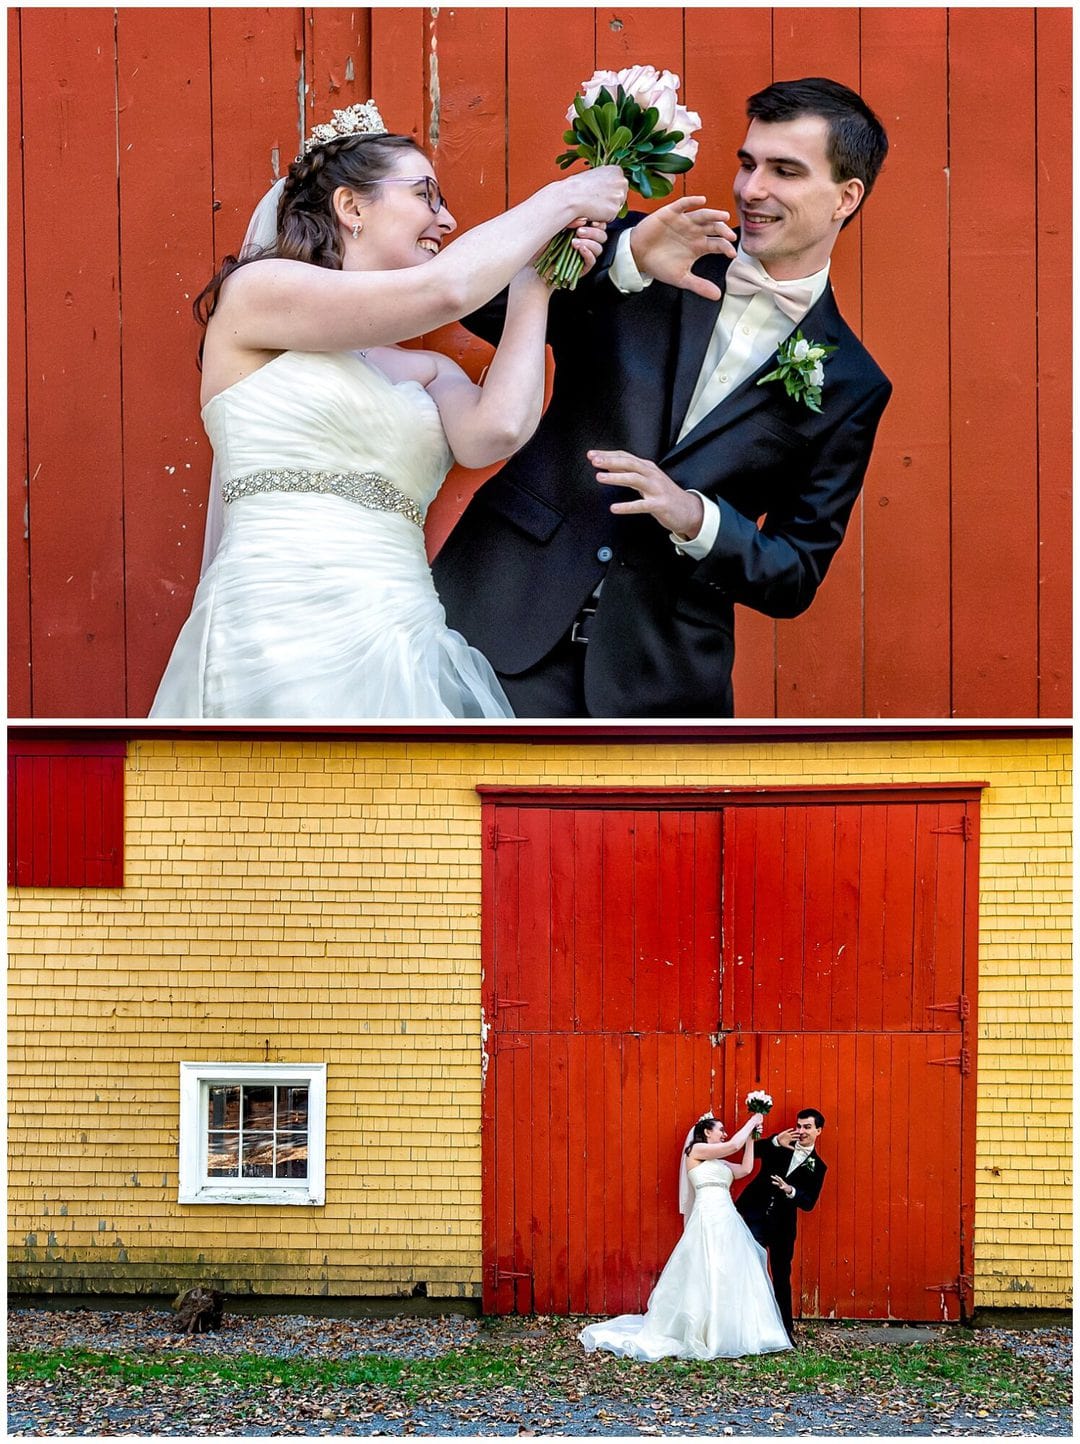 The bride and groom have some fun with each other during their wedding photos at the Kinley Farm in Lunenburg, NS.